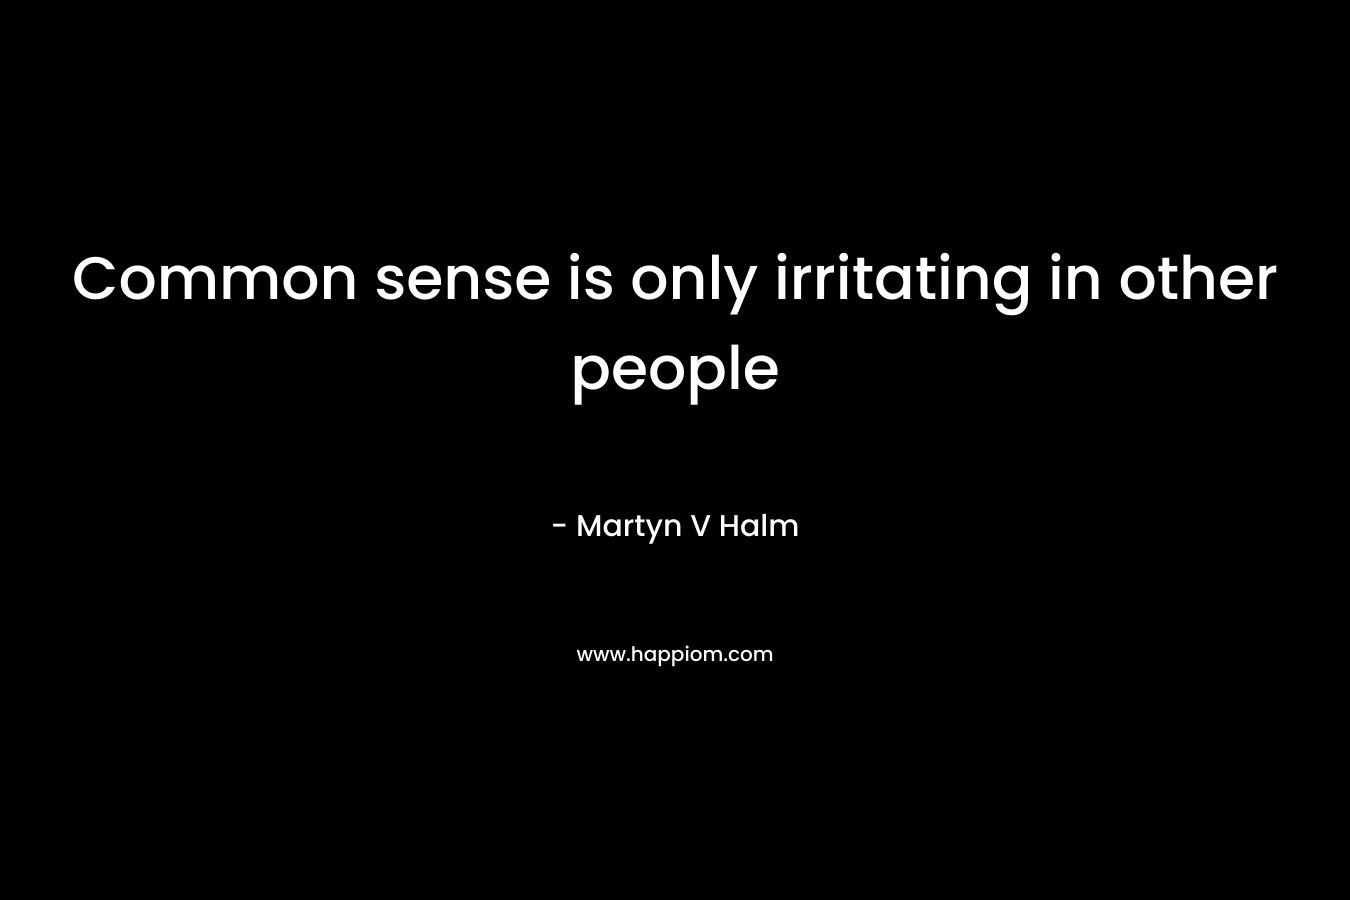 Common sense is only irritating in other people – Martyn V Halm